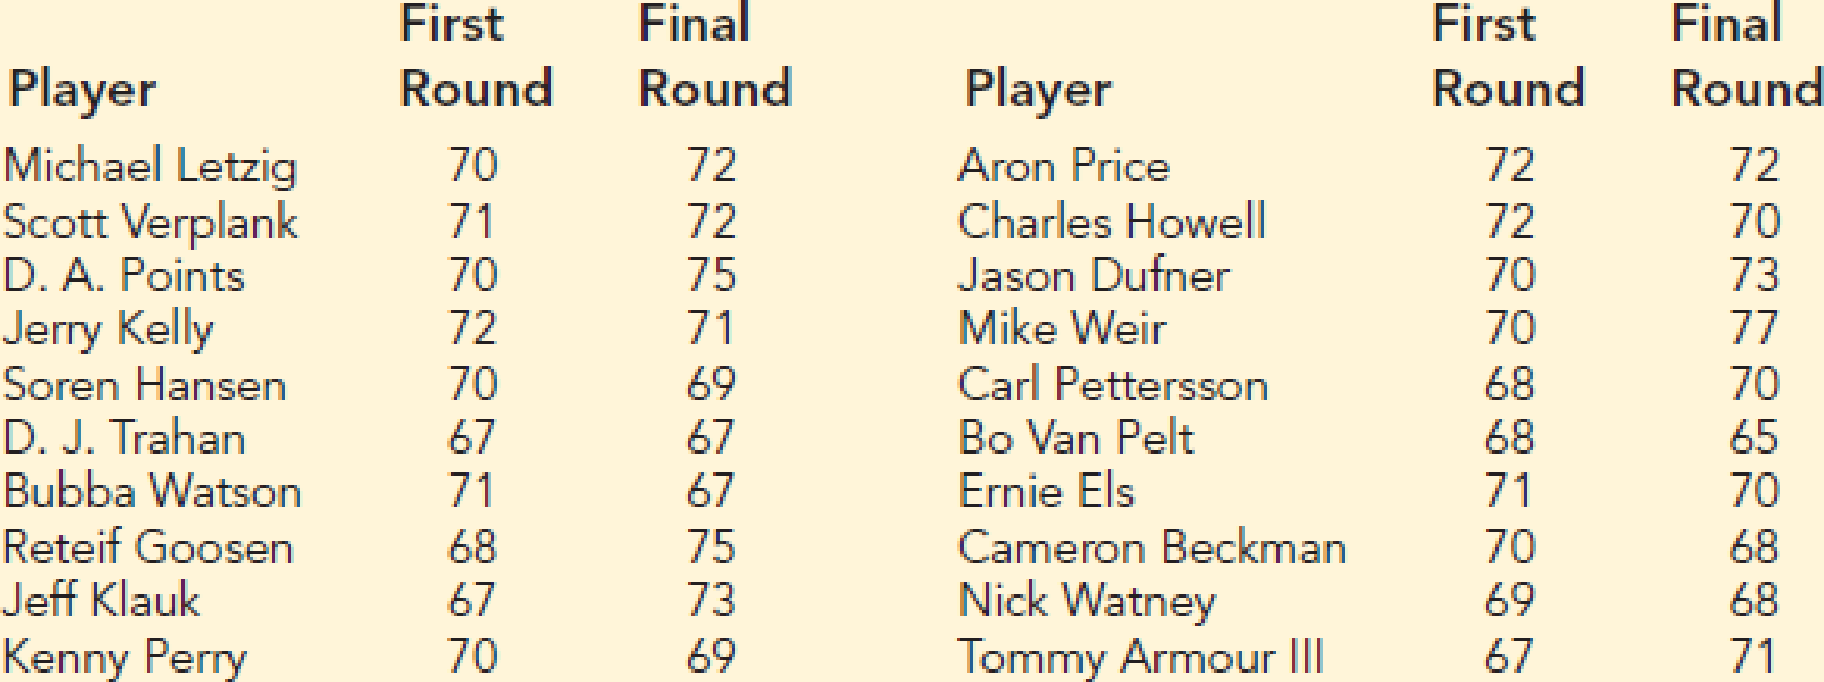 Chapter 10.3, Problem 26E, PGA Tour Scores. Scores in the first and fourth (final) rounds for a sample of 20 golfers who 